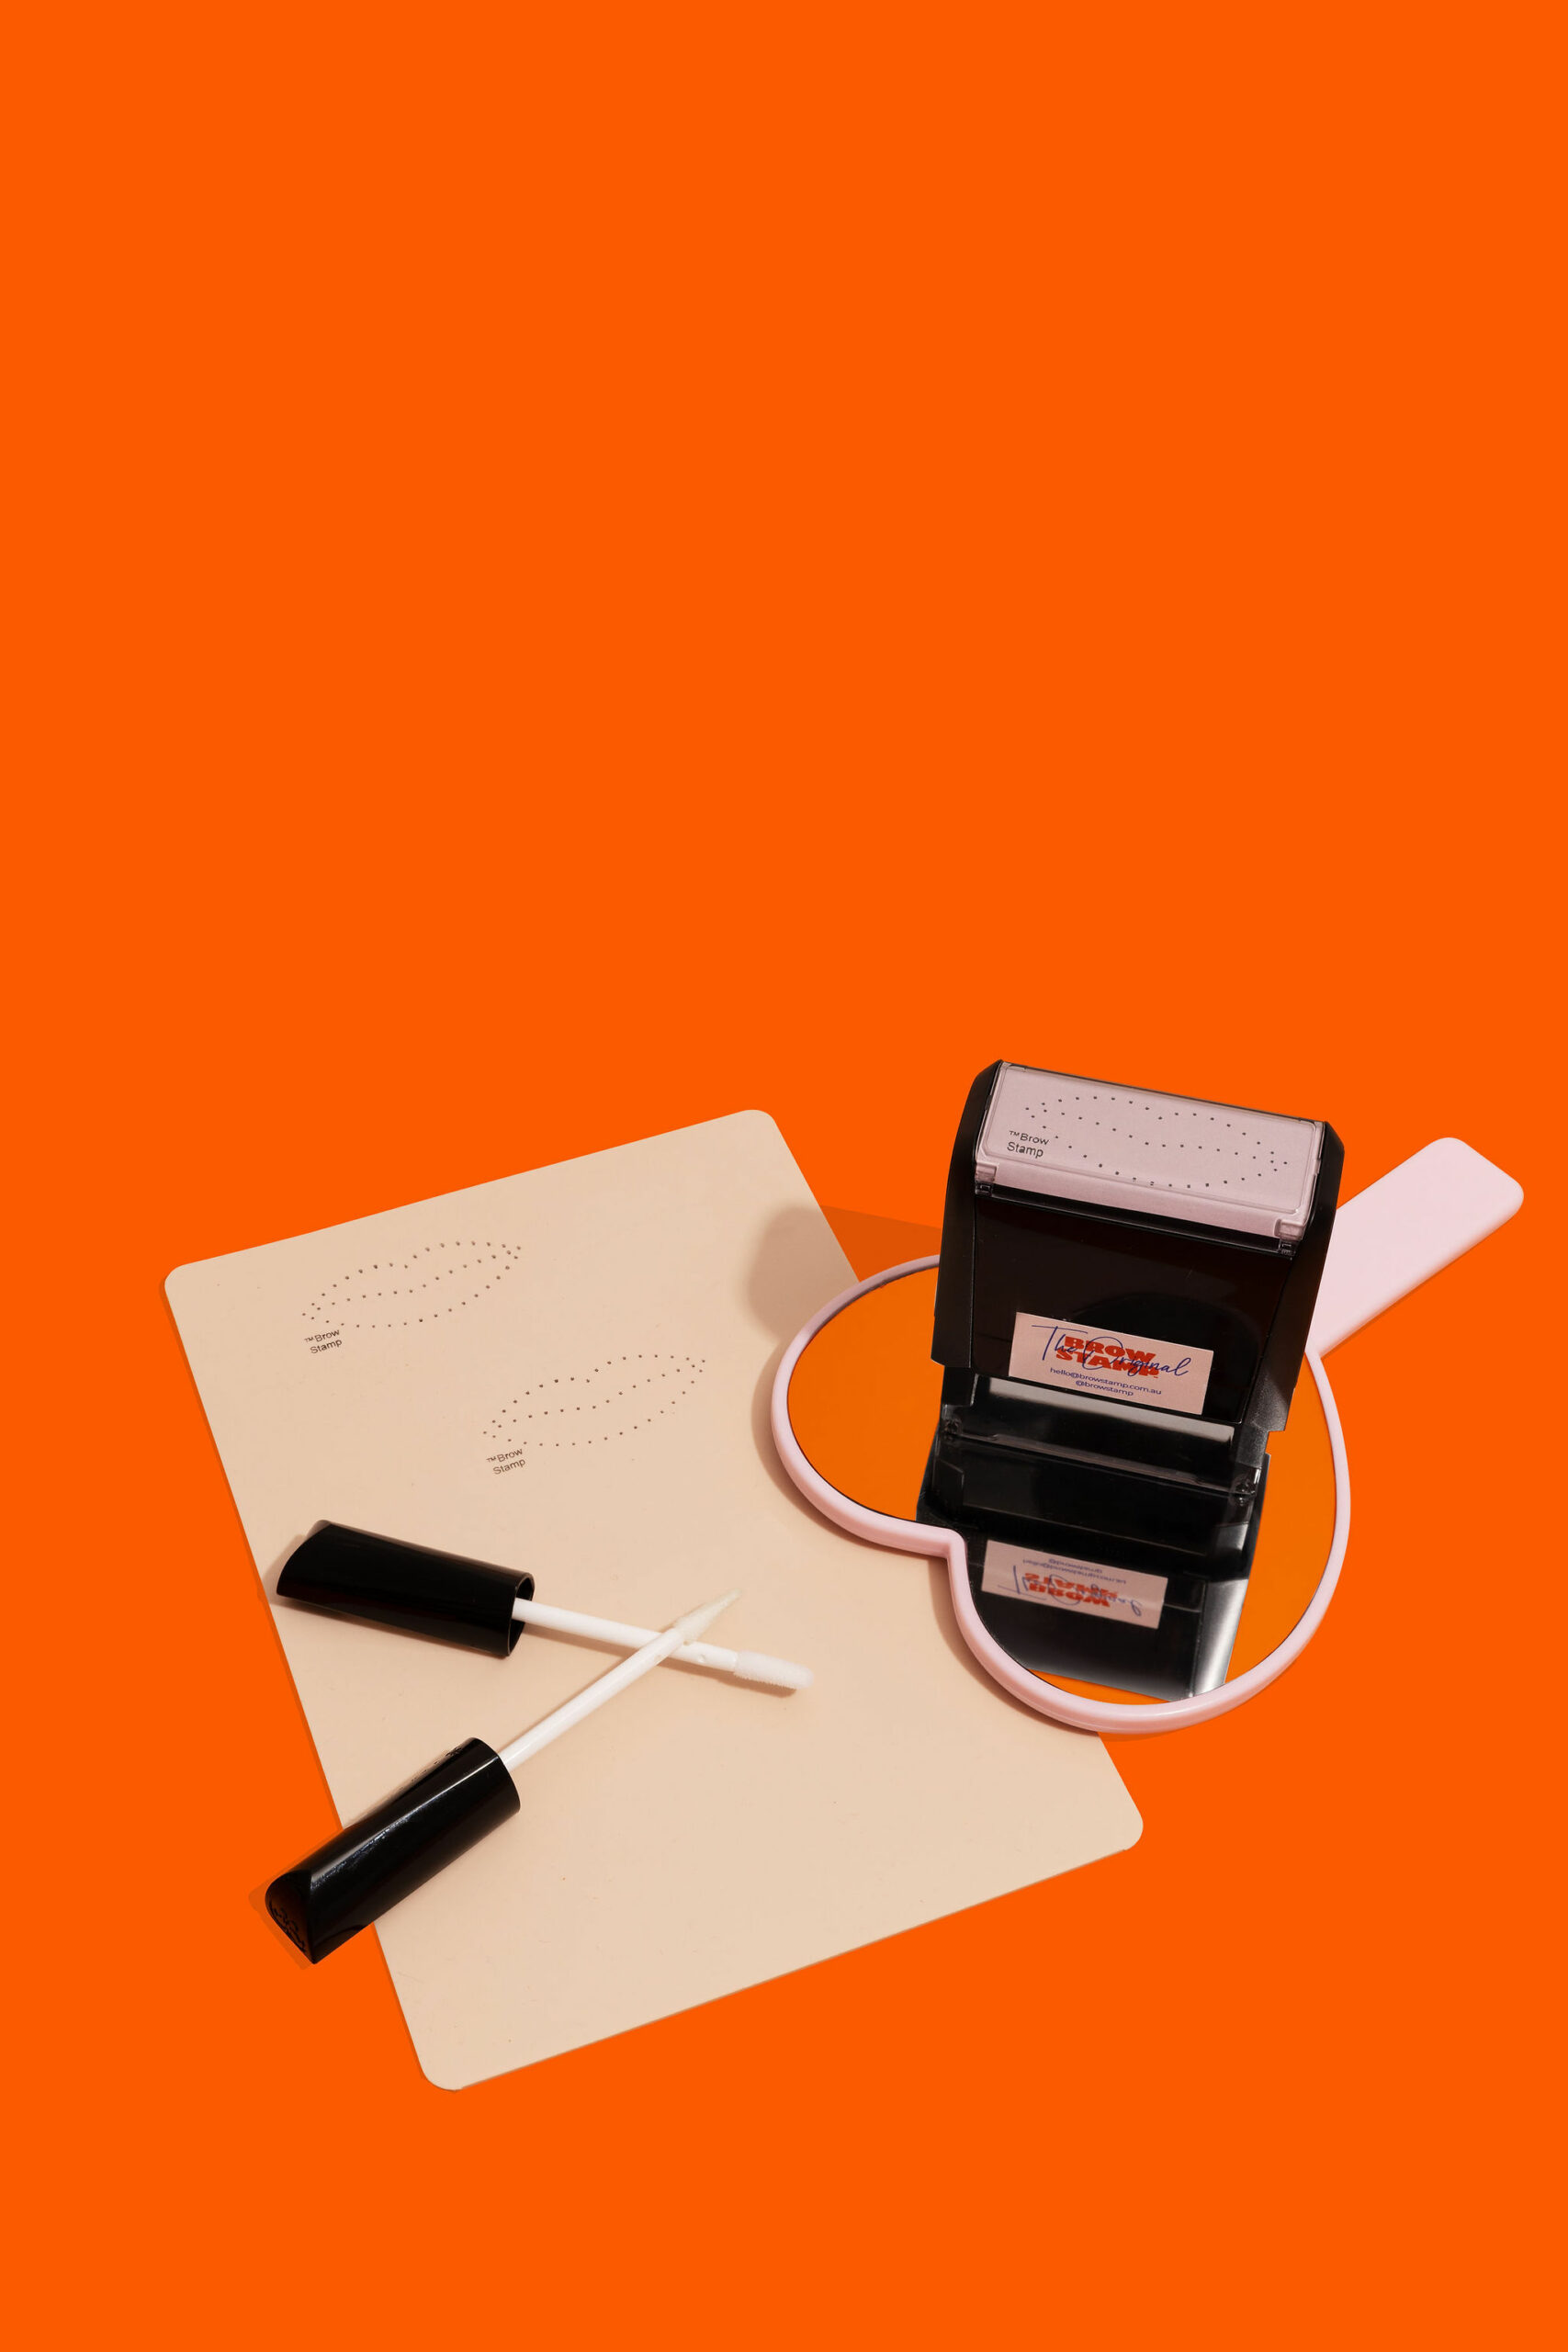 Fun Product Photography for beauty brand The Brow Stamp. Styled product photography by Colourpop Studio